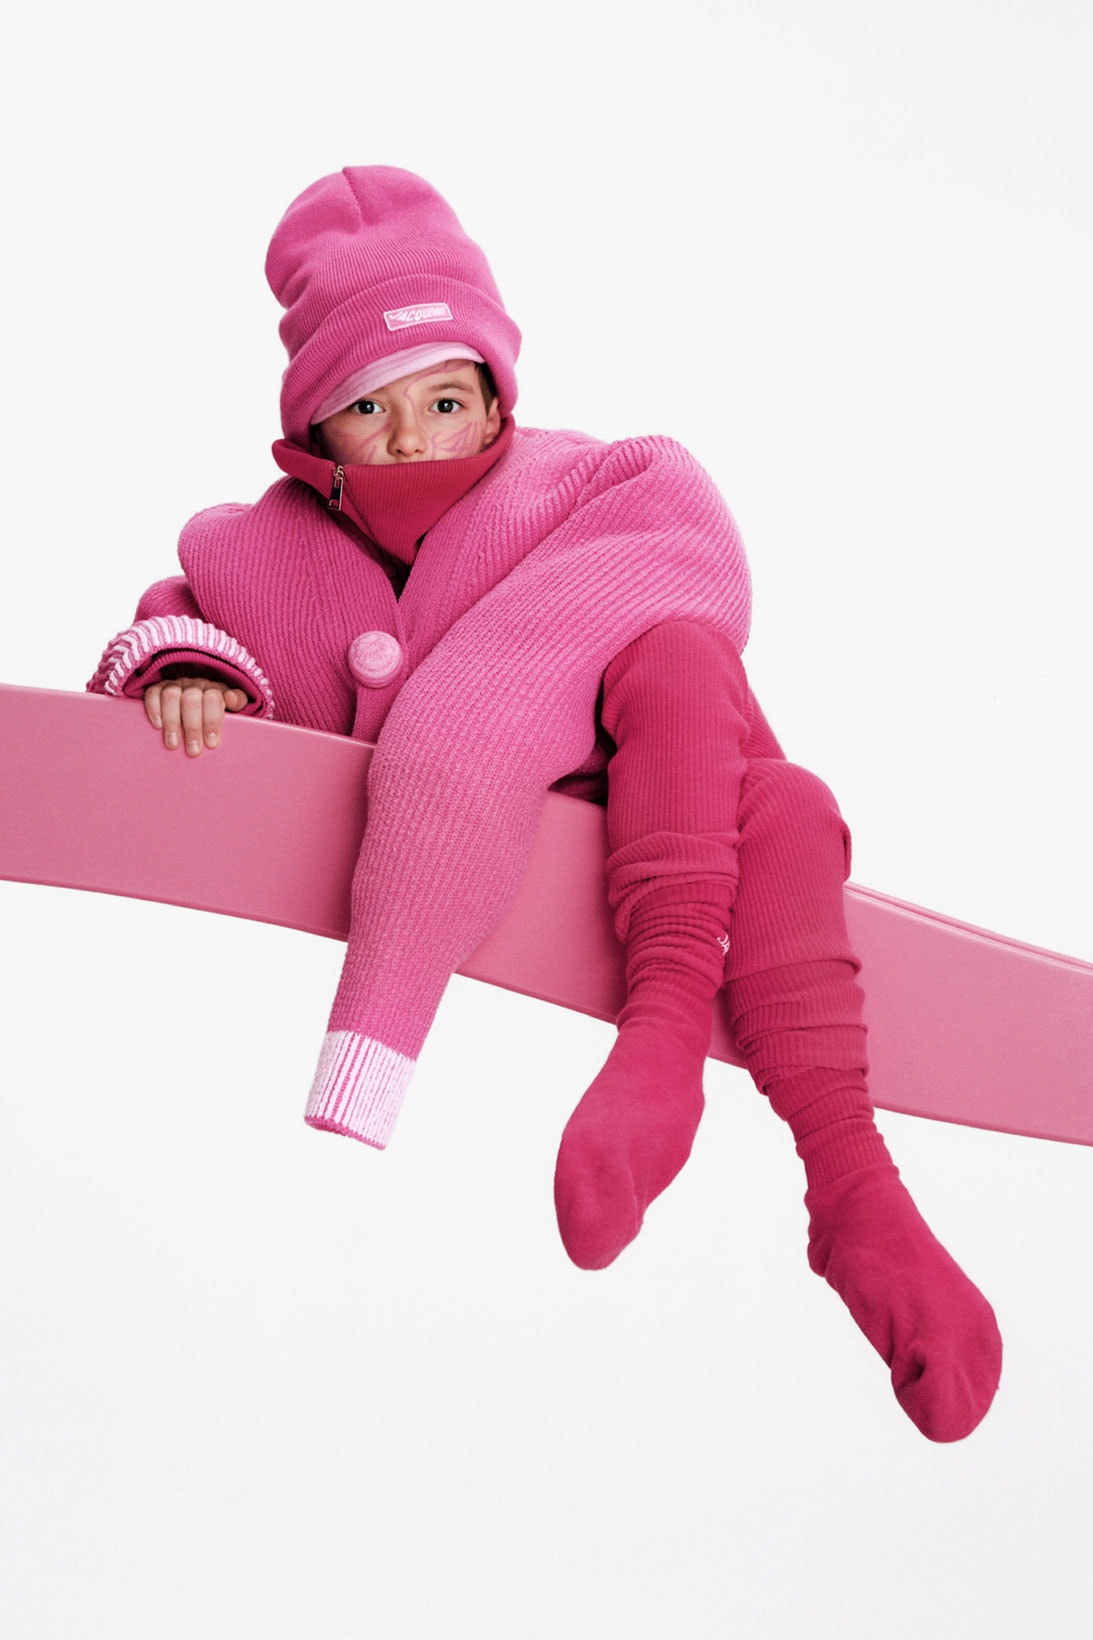 Jacquemus Pink Holiday 2021 Sweater Kids Childrens